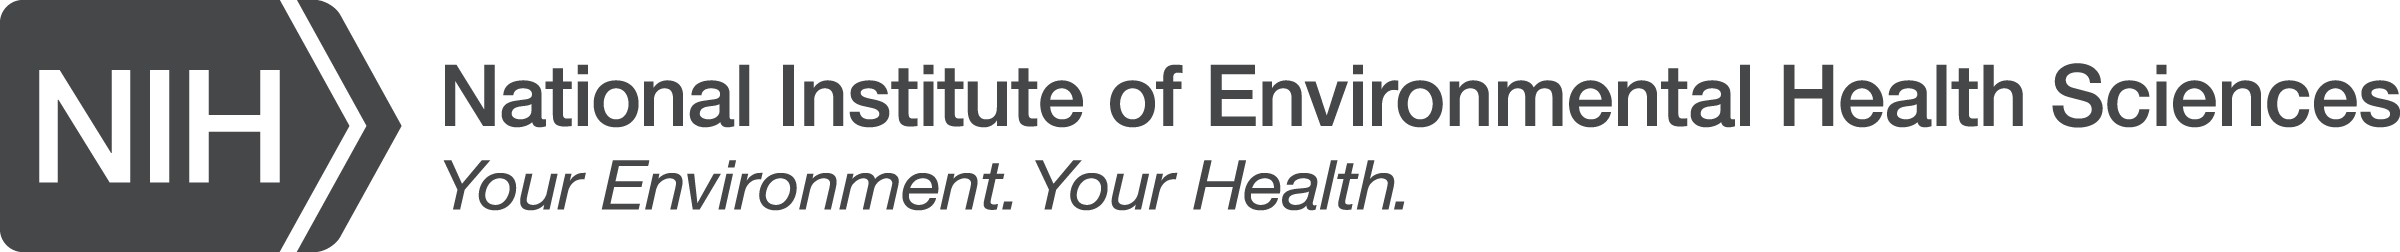 NIH - National Institute of Environmental Health Sciences - Your Environment. Your Health.